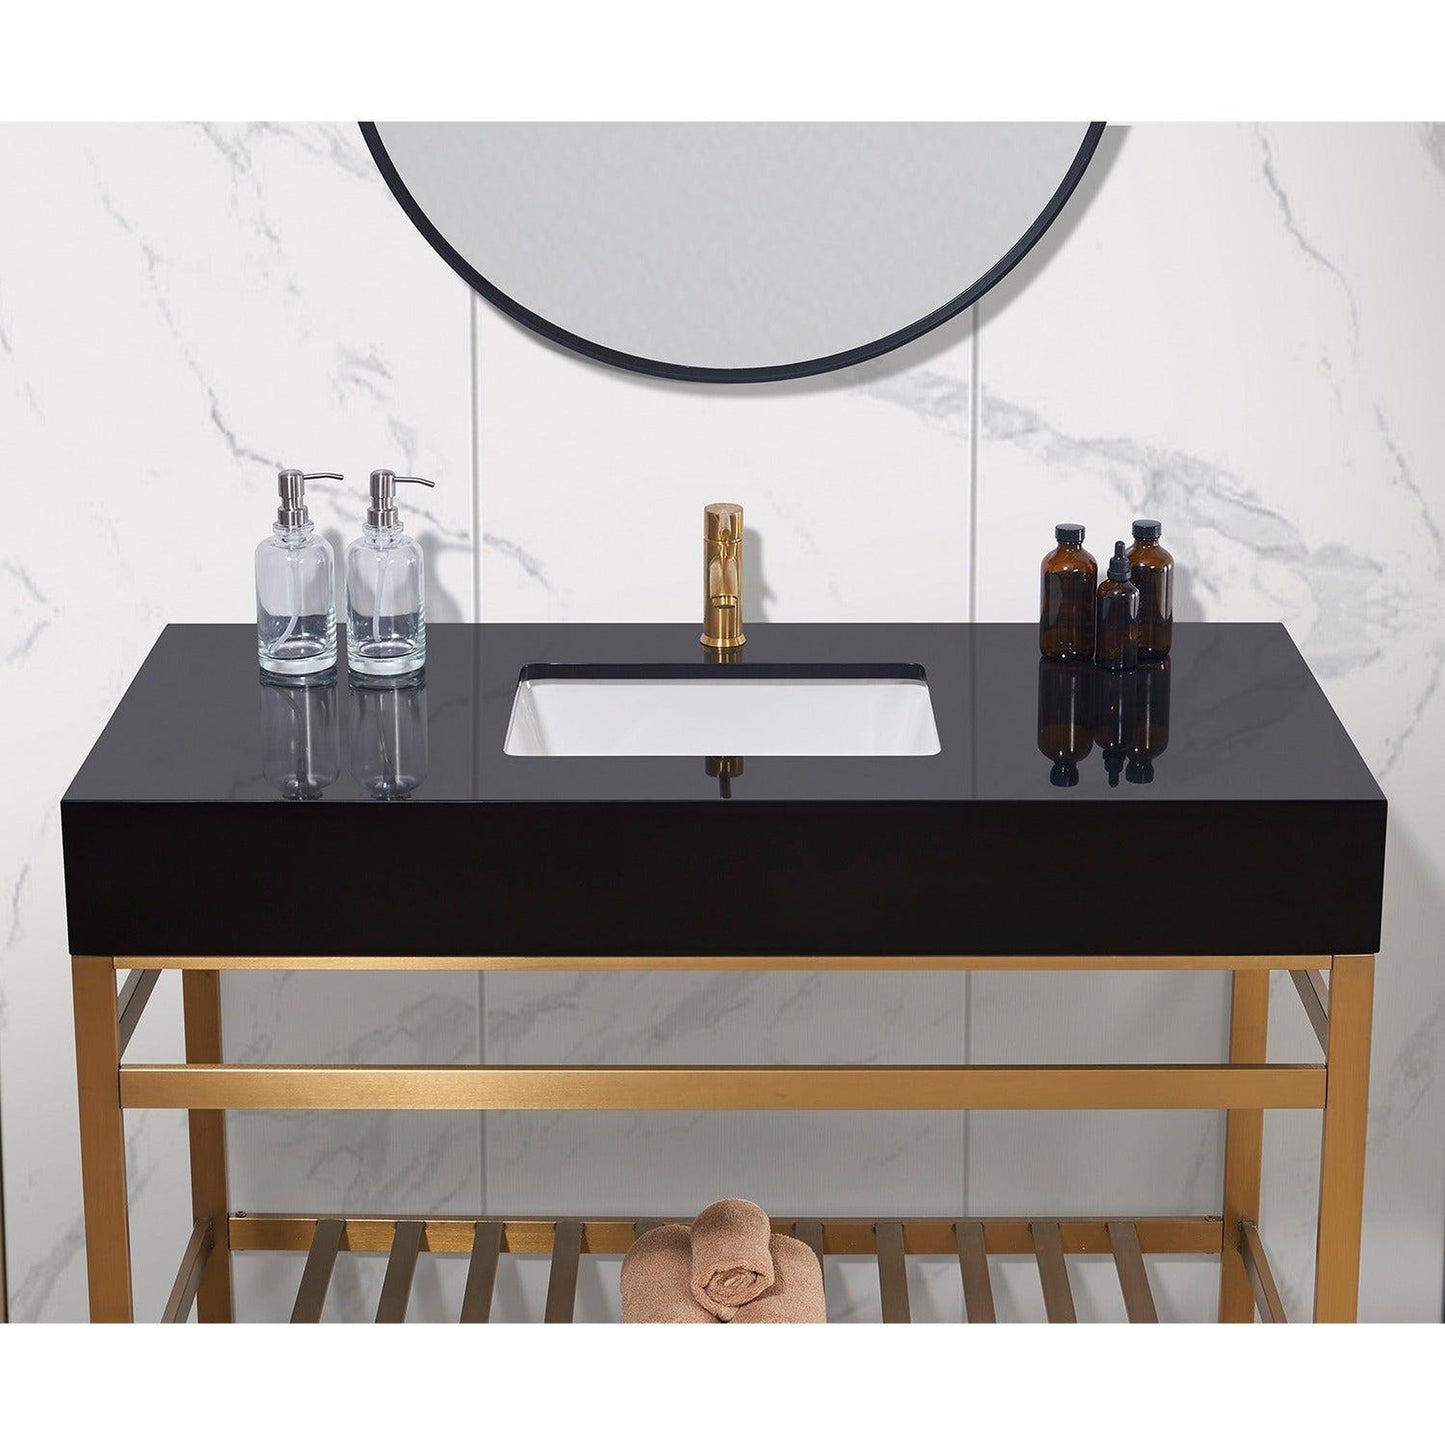 Altair Nauders 48" x 22" Imperial Black Apron Composite Stone Bathroom Vanity Top With White SInk